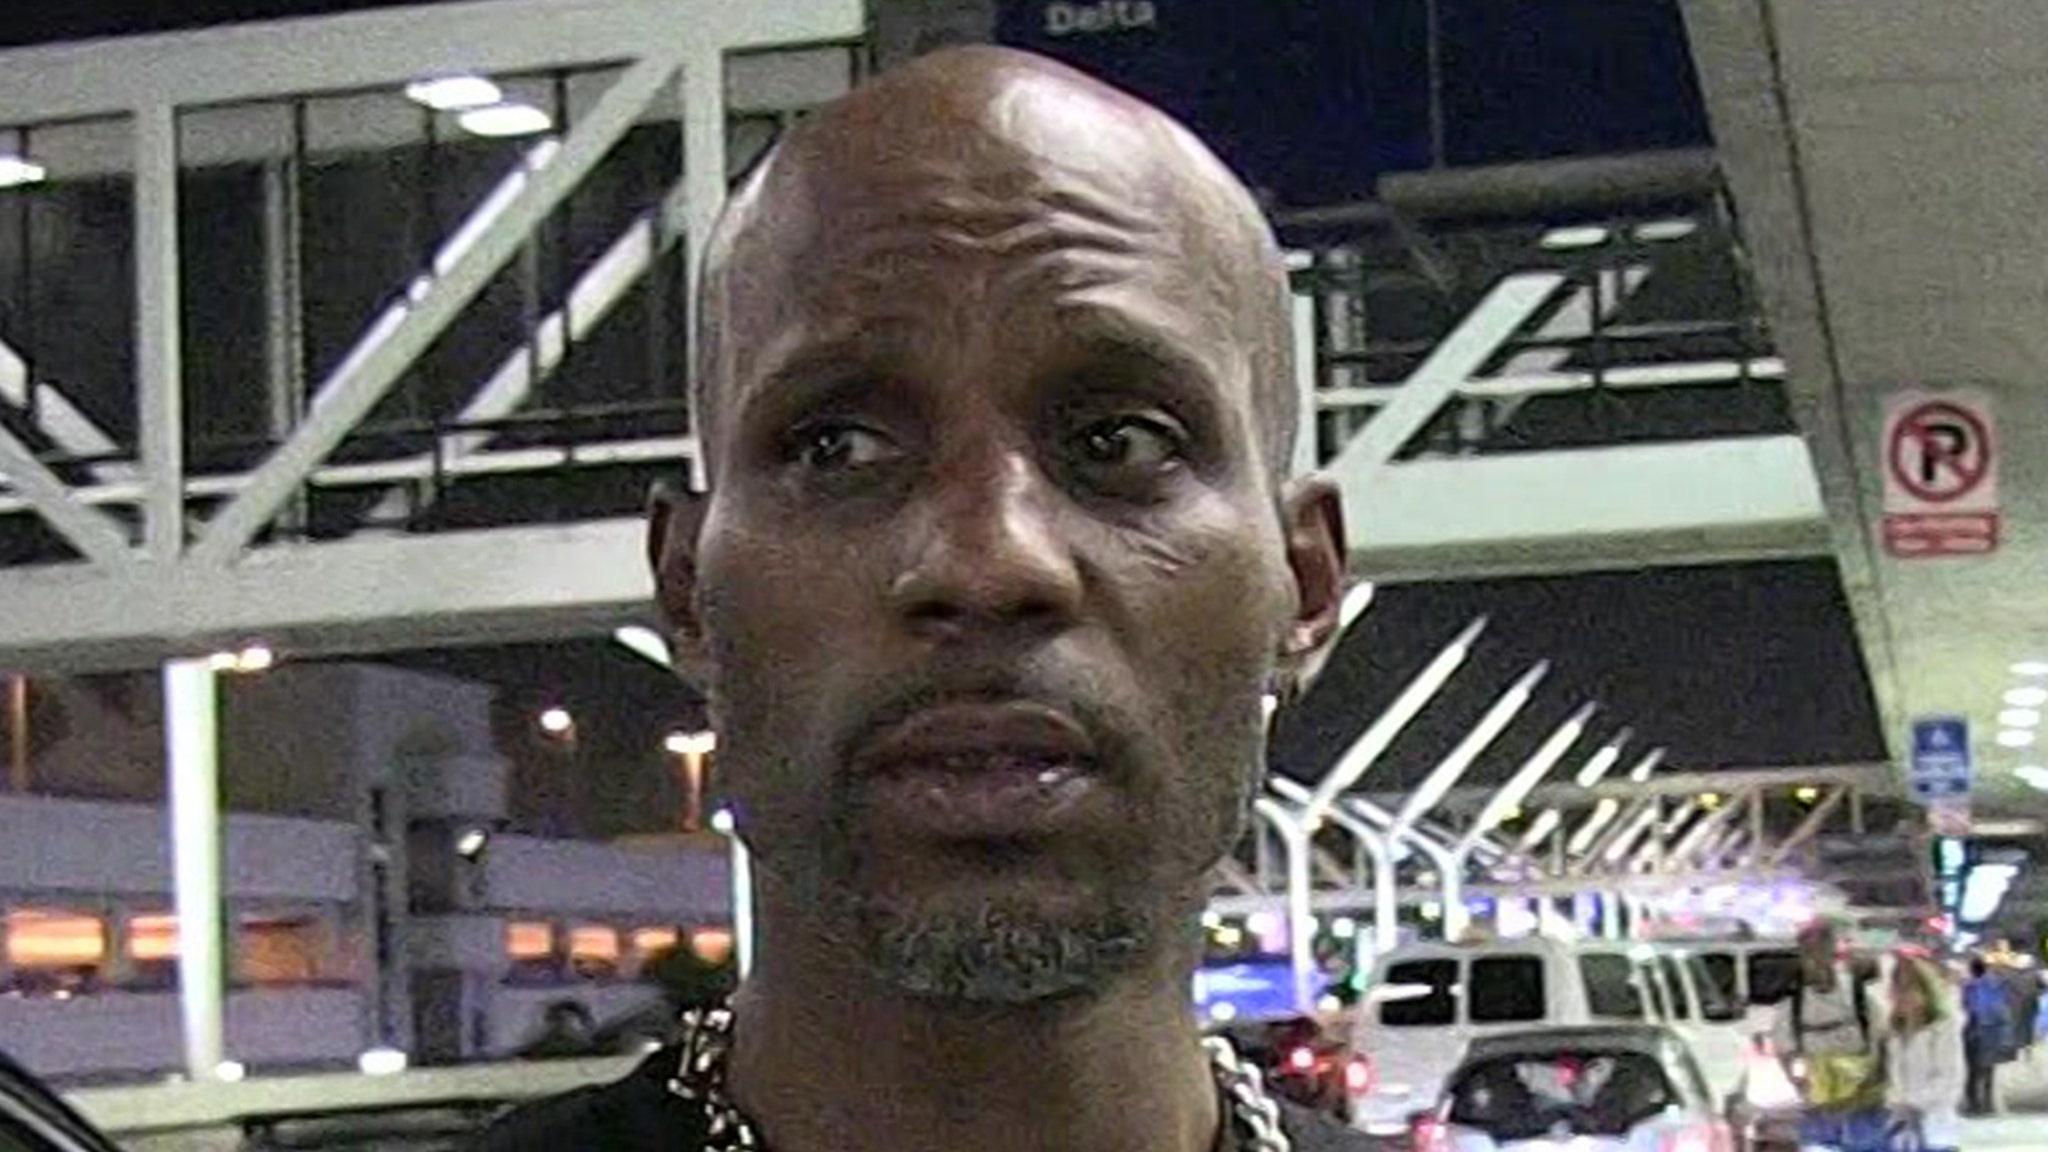 Visits by the DMX family, offers hope while he remains on life support after an overdose